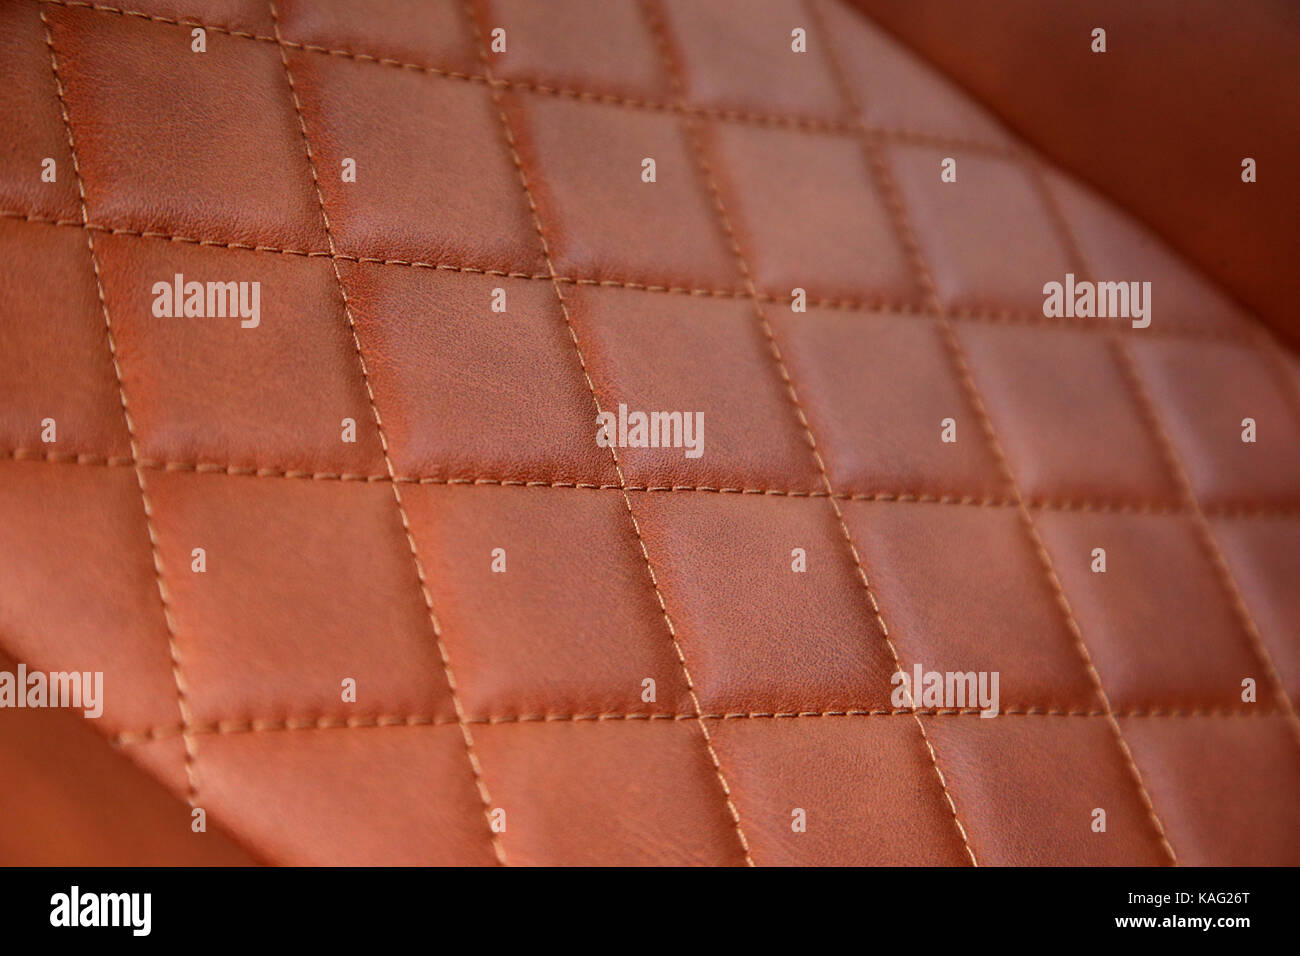 A detailed image of the tan leather and stitching of a Lamborghini Aventador seat Stock Photo